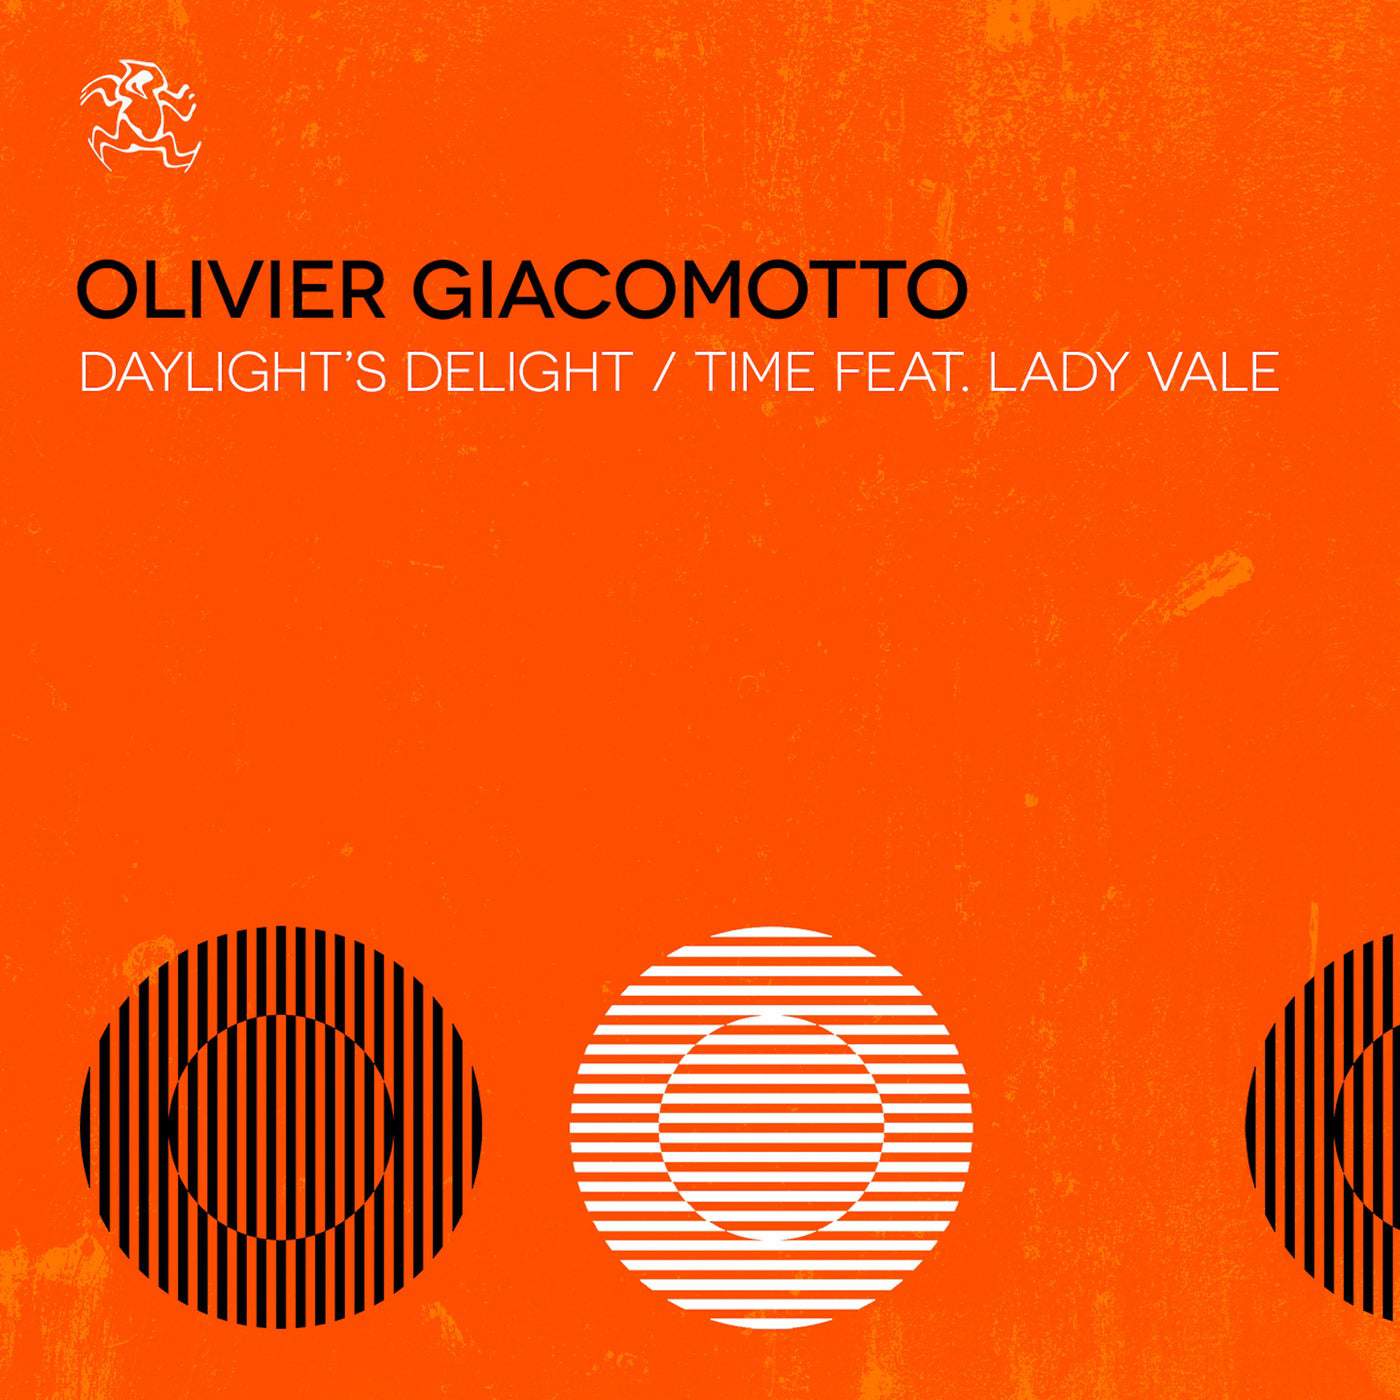 image cover: Olivier Giacomotto, Lady Vale - Daylight's Delight / Time feat. Lady Vale / YR286BP